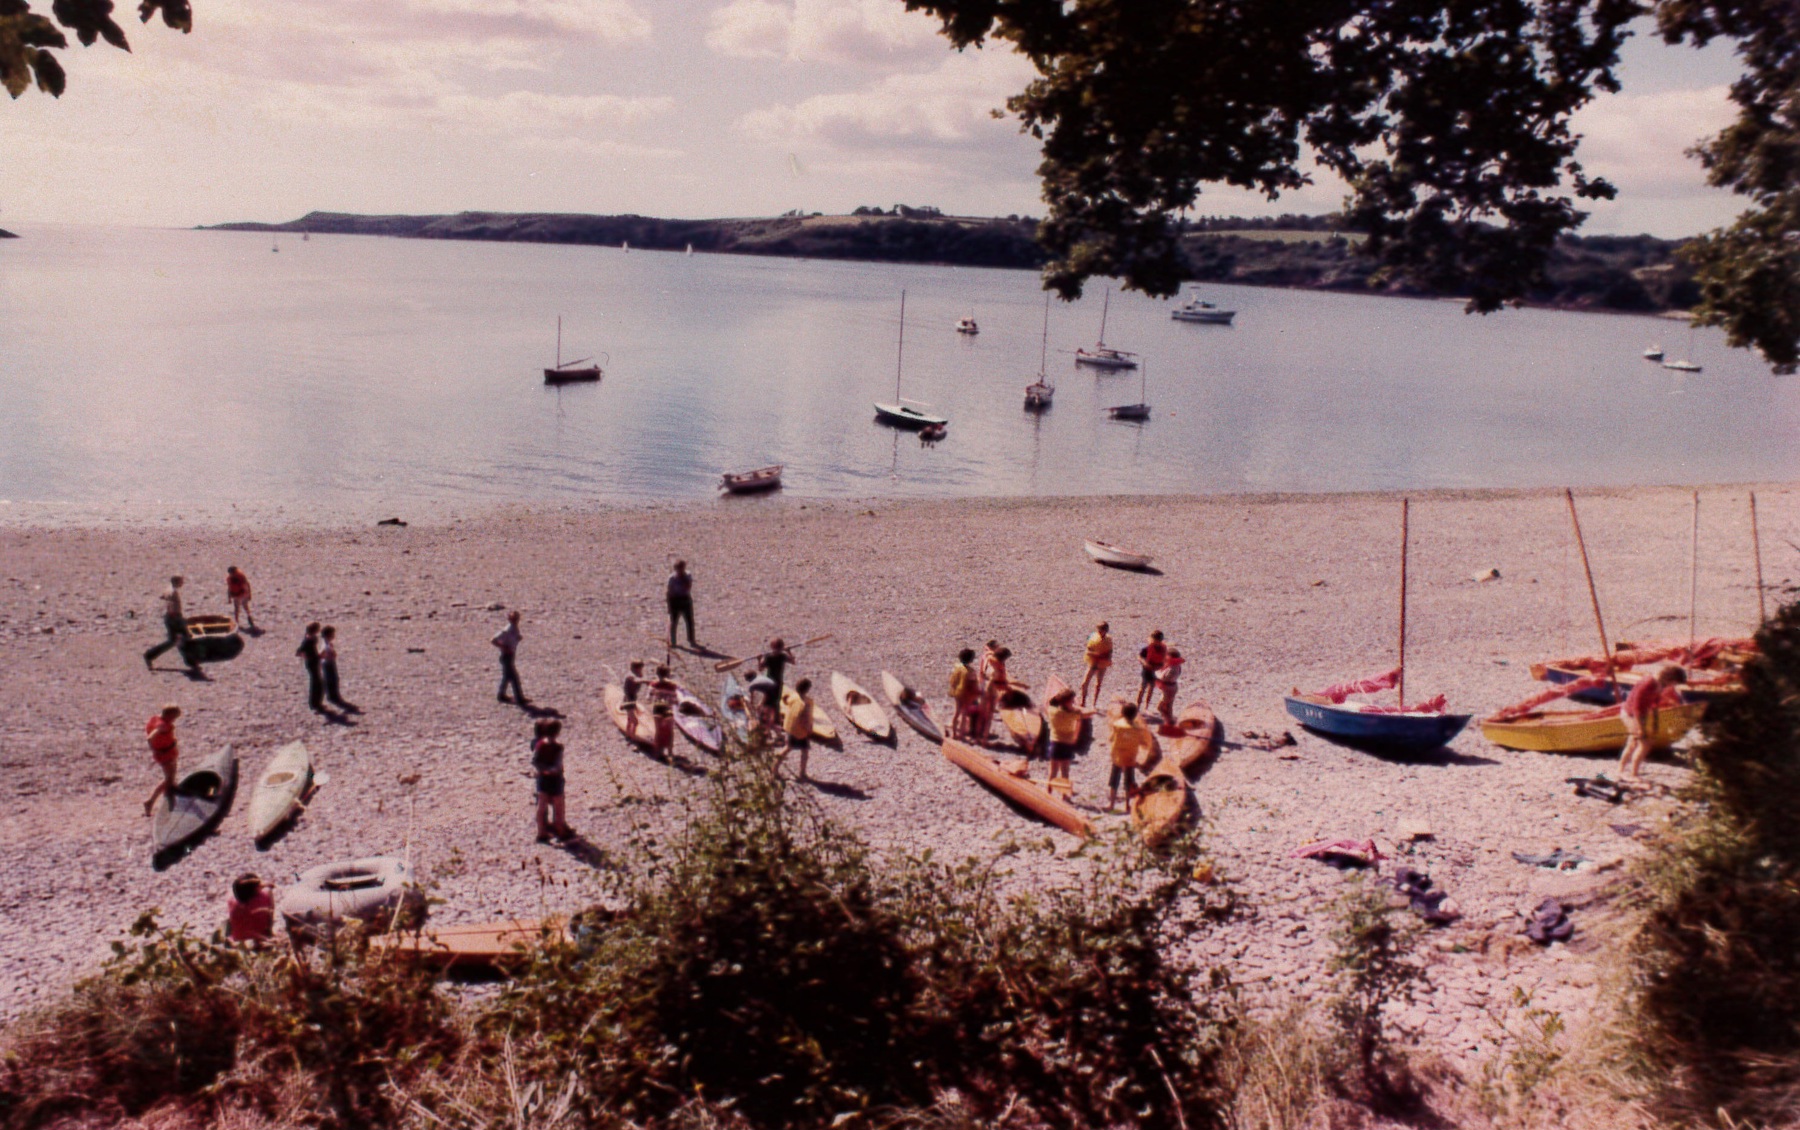 The photo shows a beach with lots of rowing boats on the sand and in the water. There are people in the distance gathered around the boats.